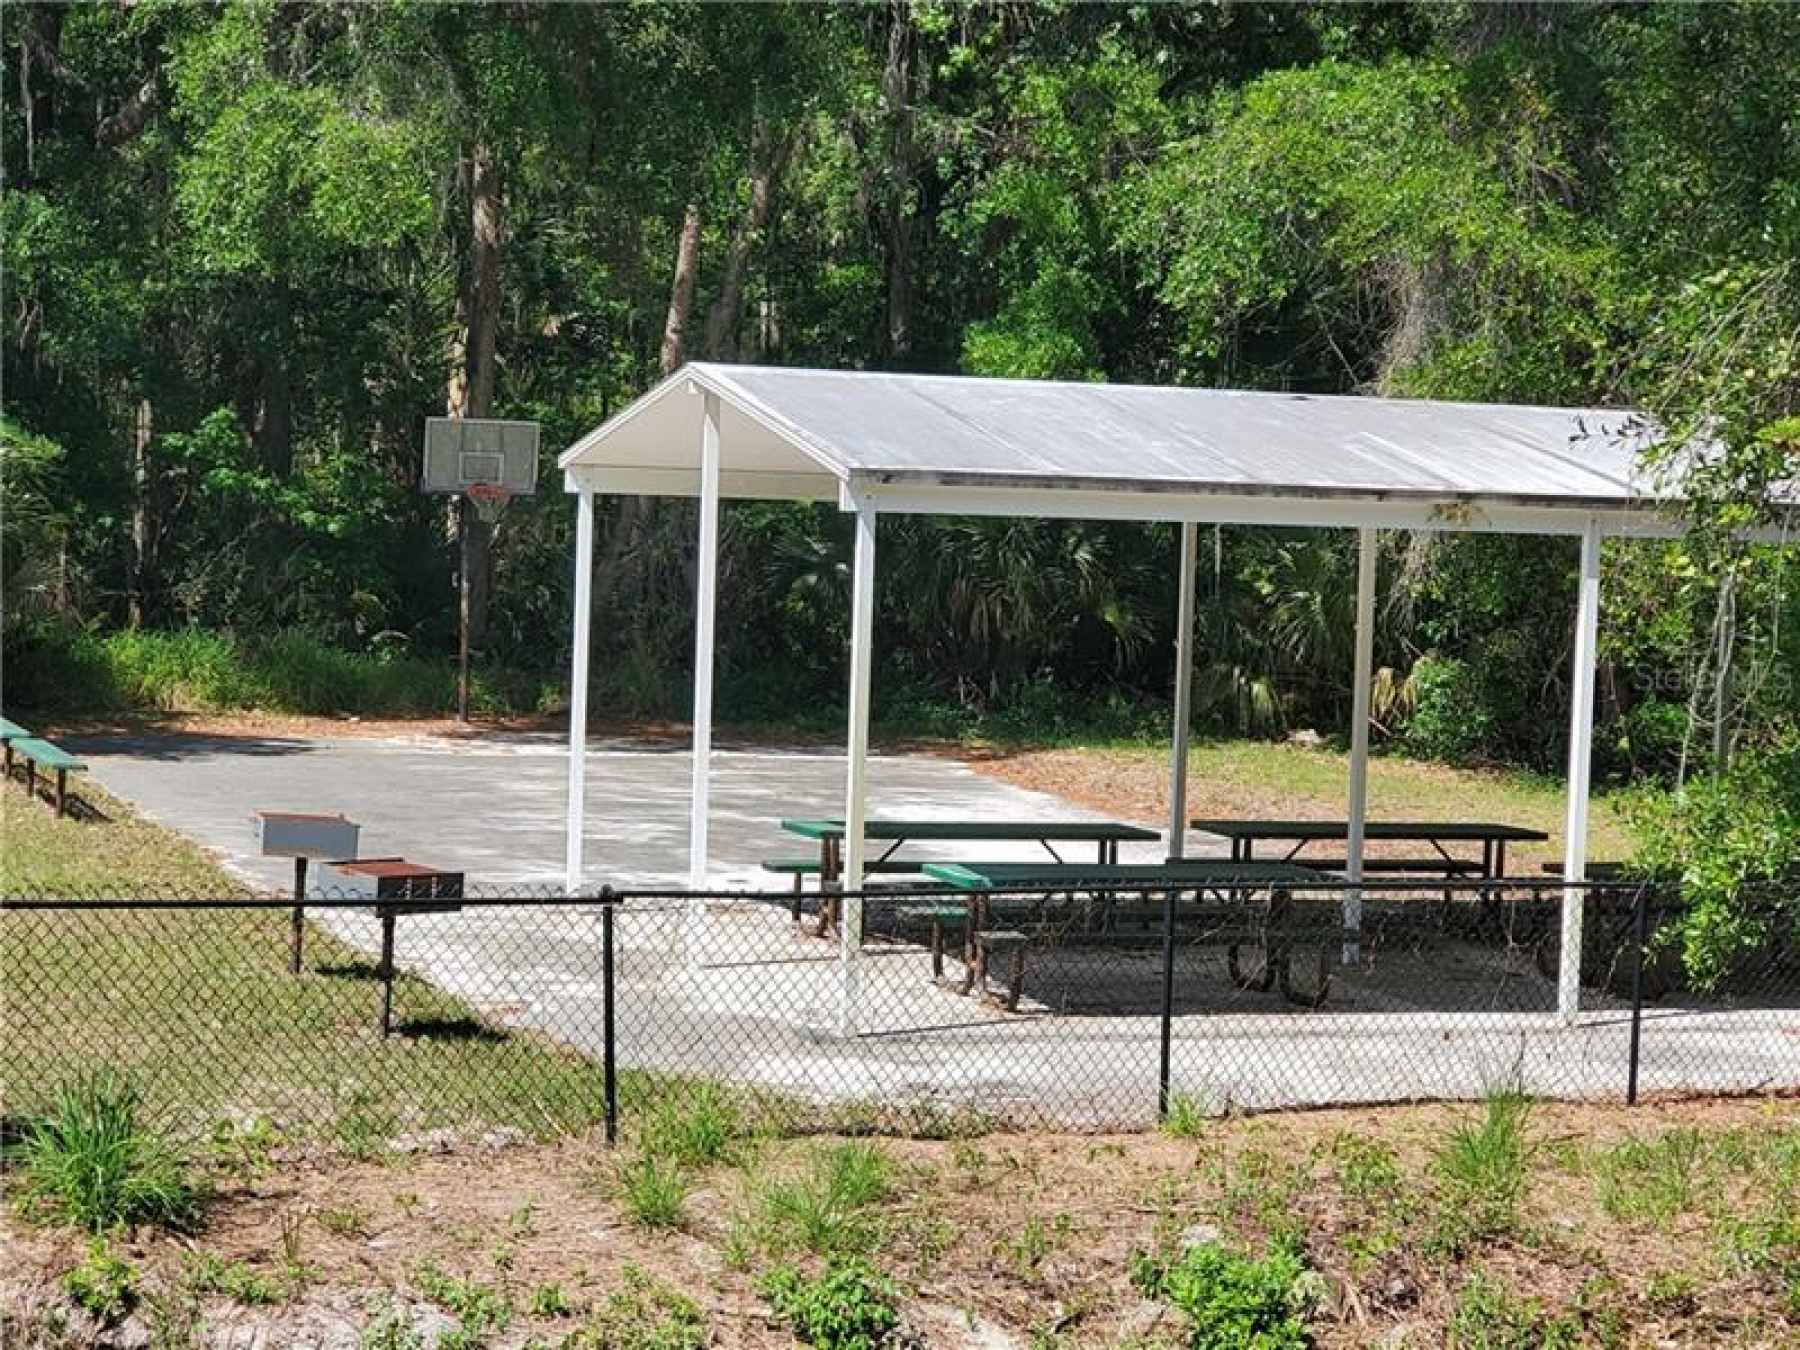 Community picnic area and basketball court